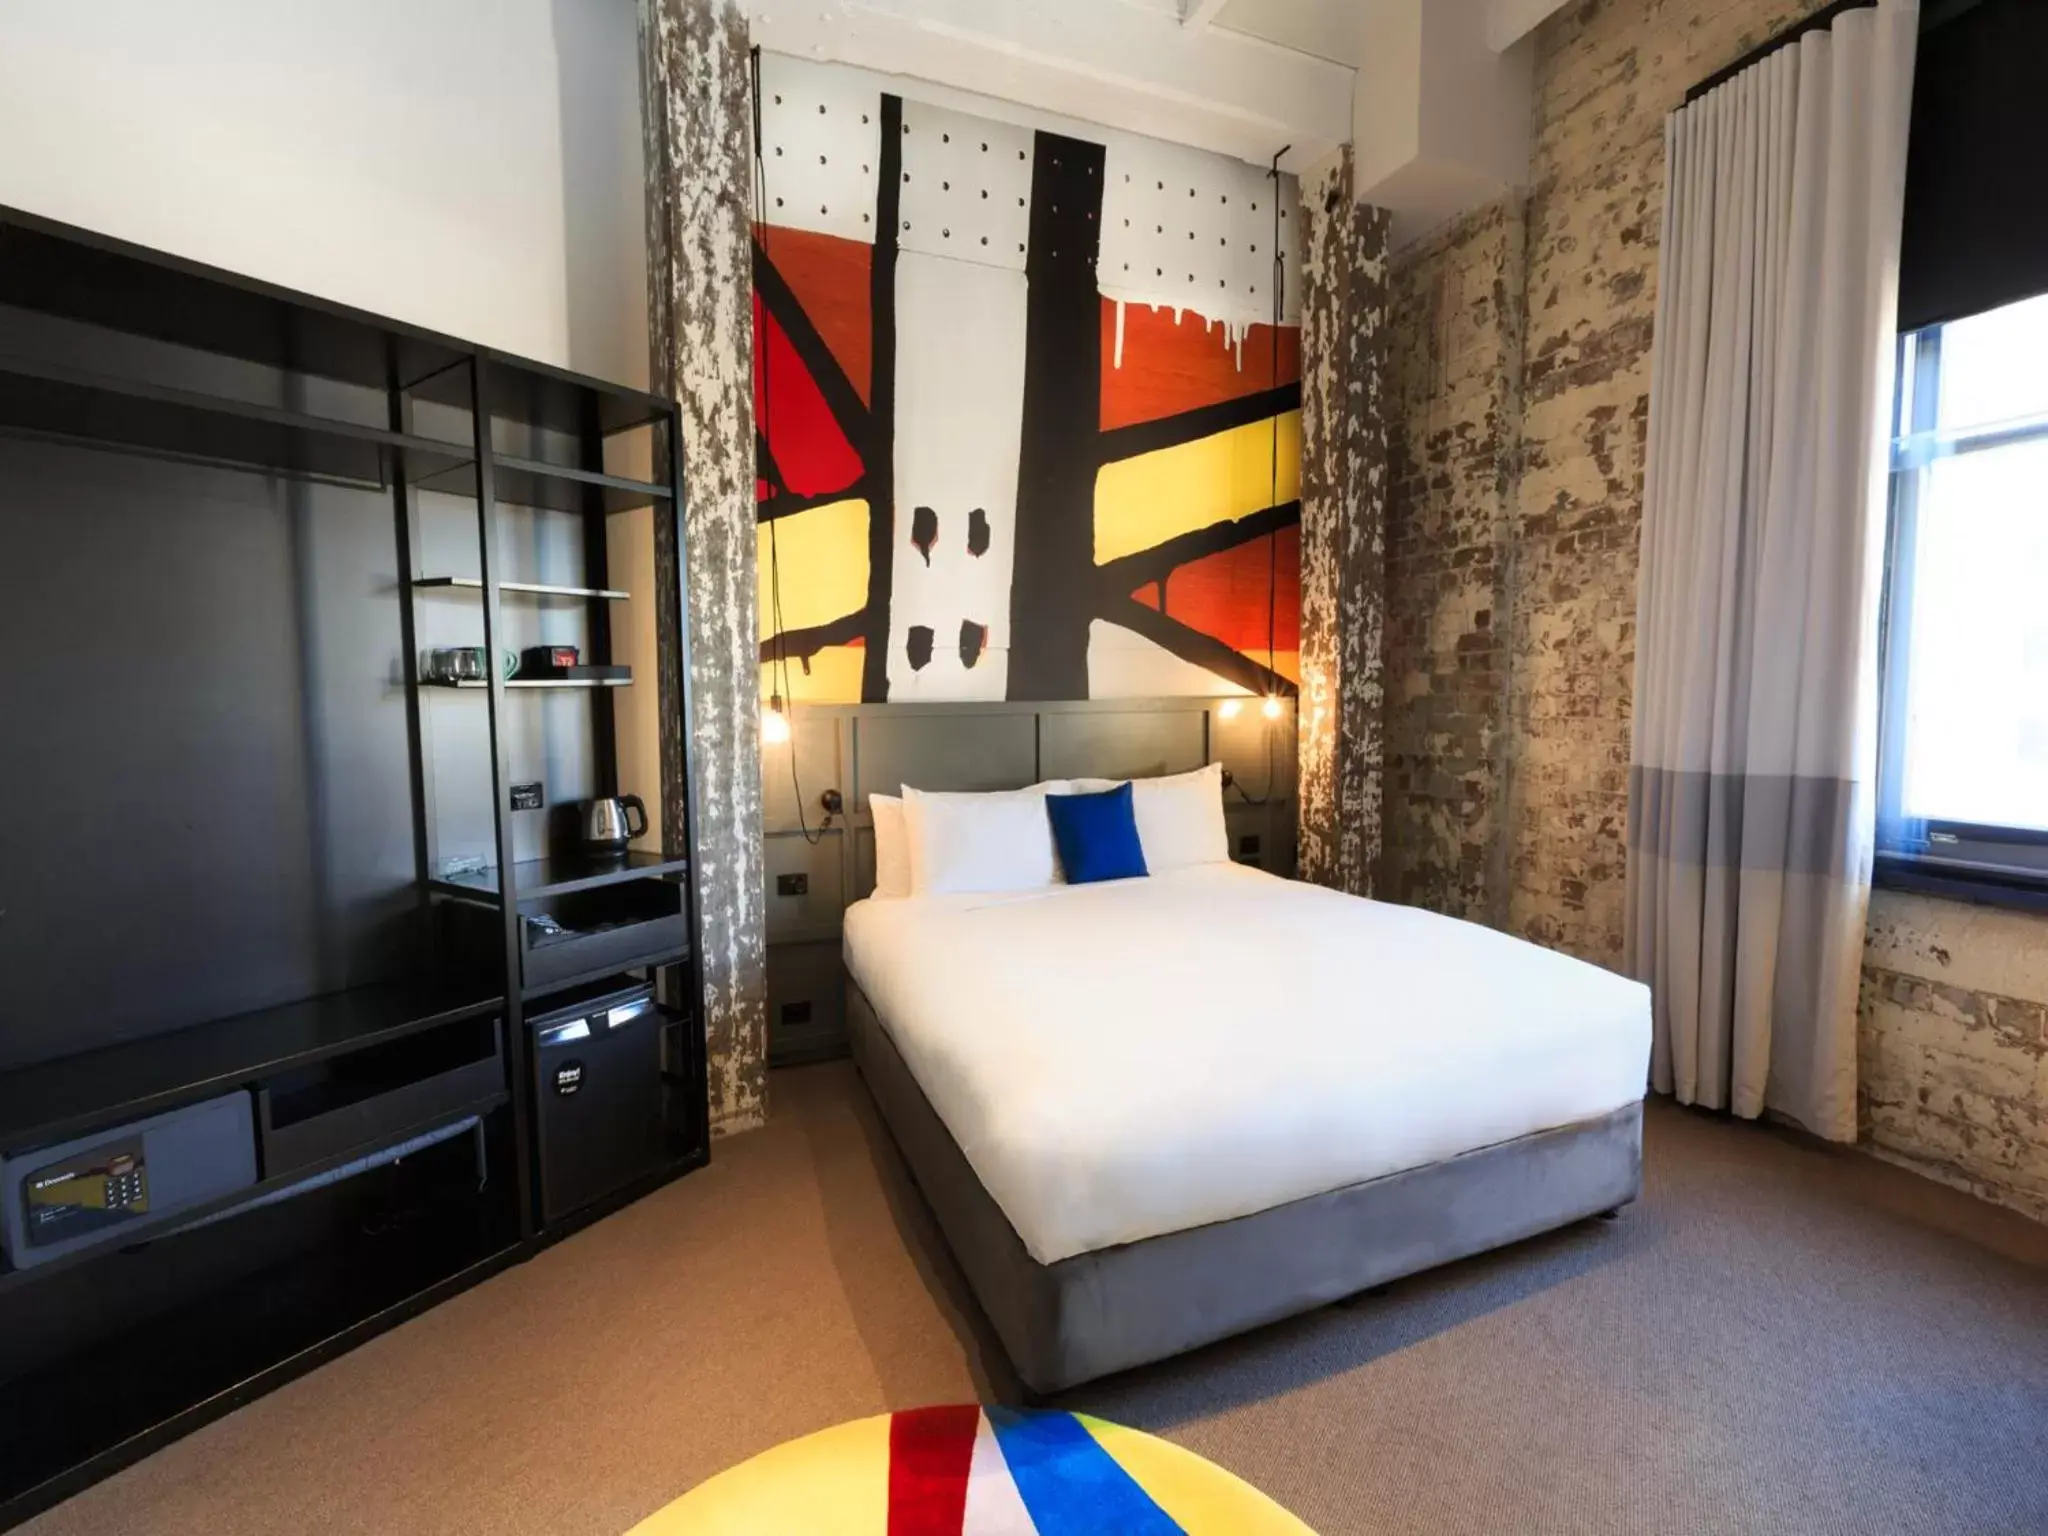 Bed, Room Photo in The Woolstore 1888 by Ovolo